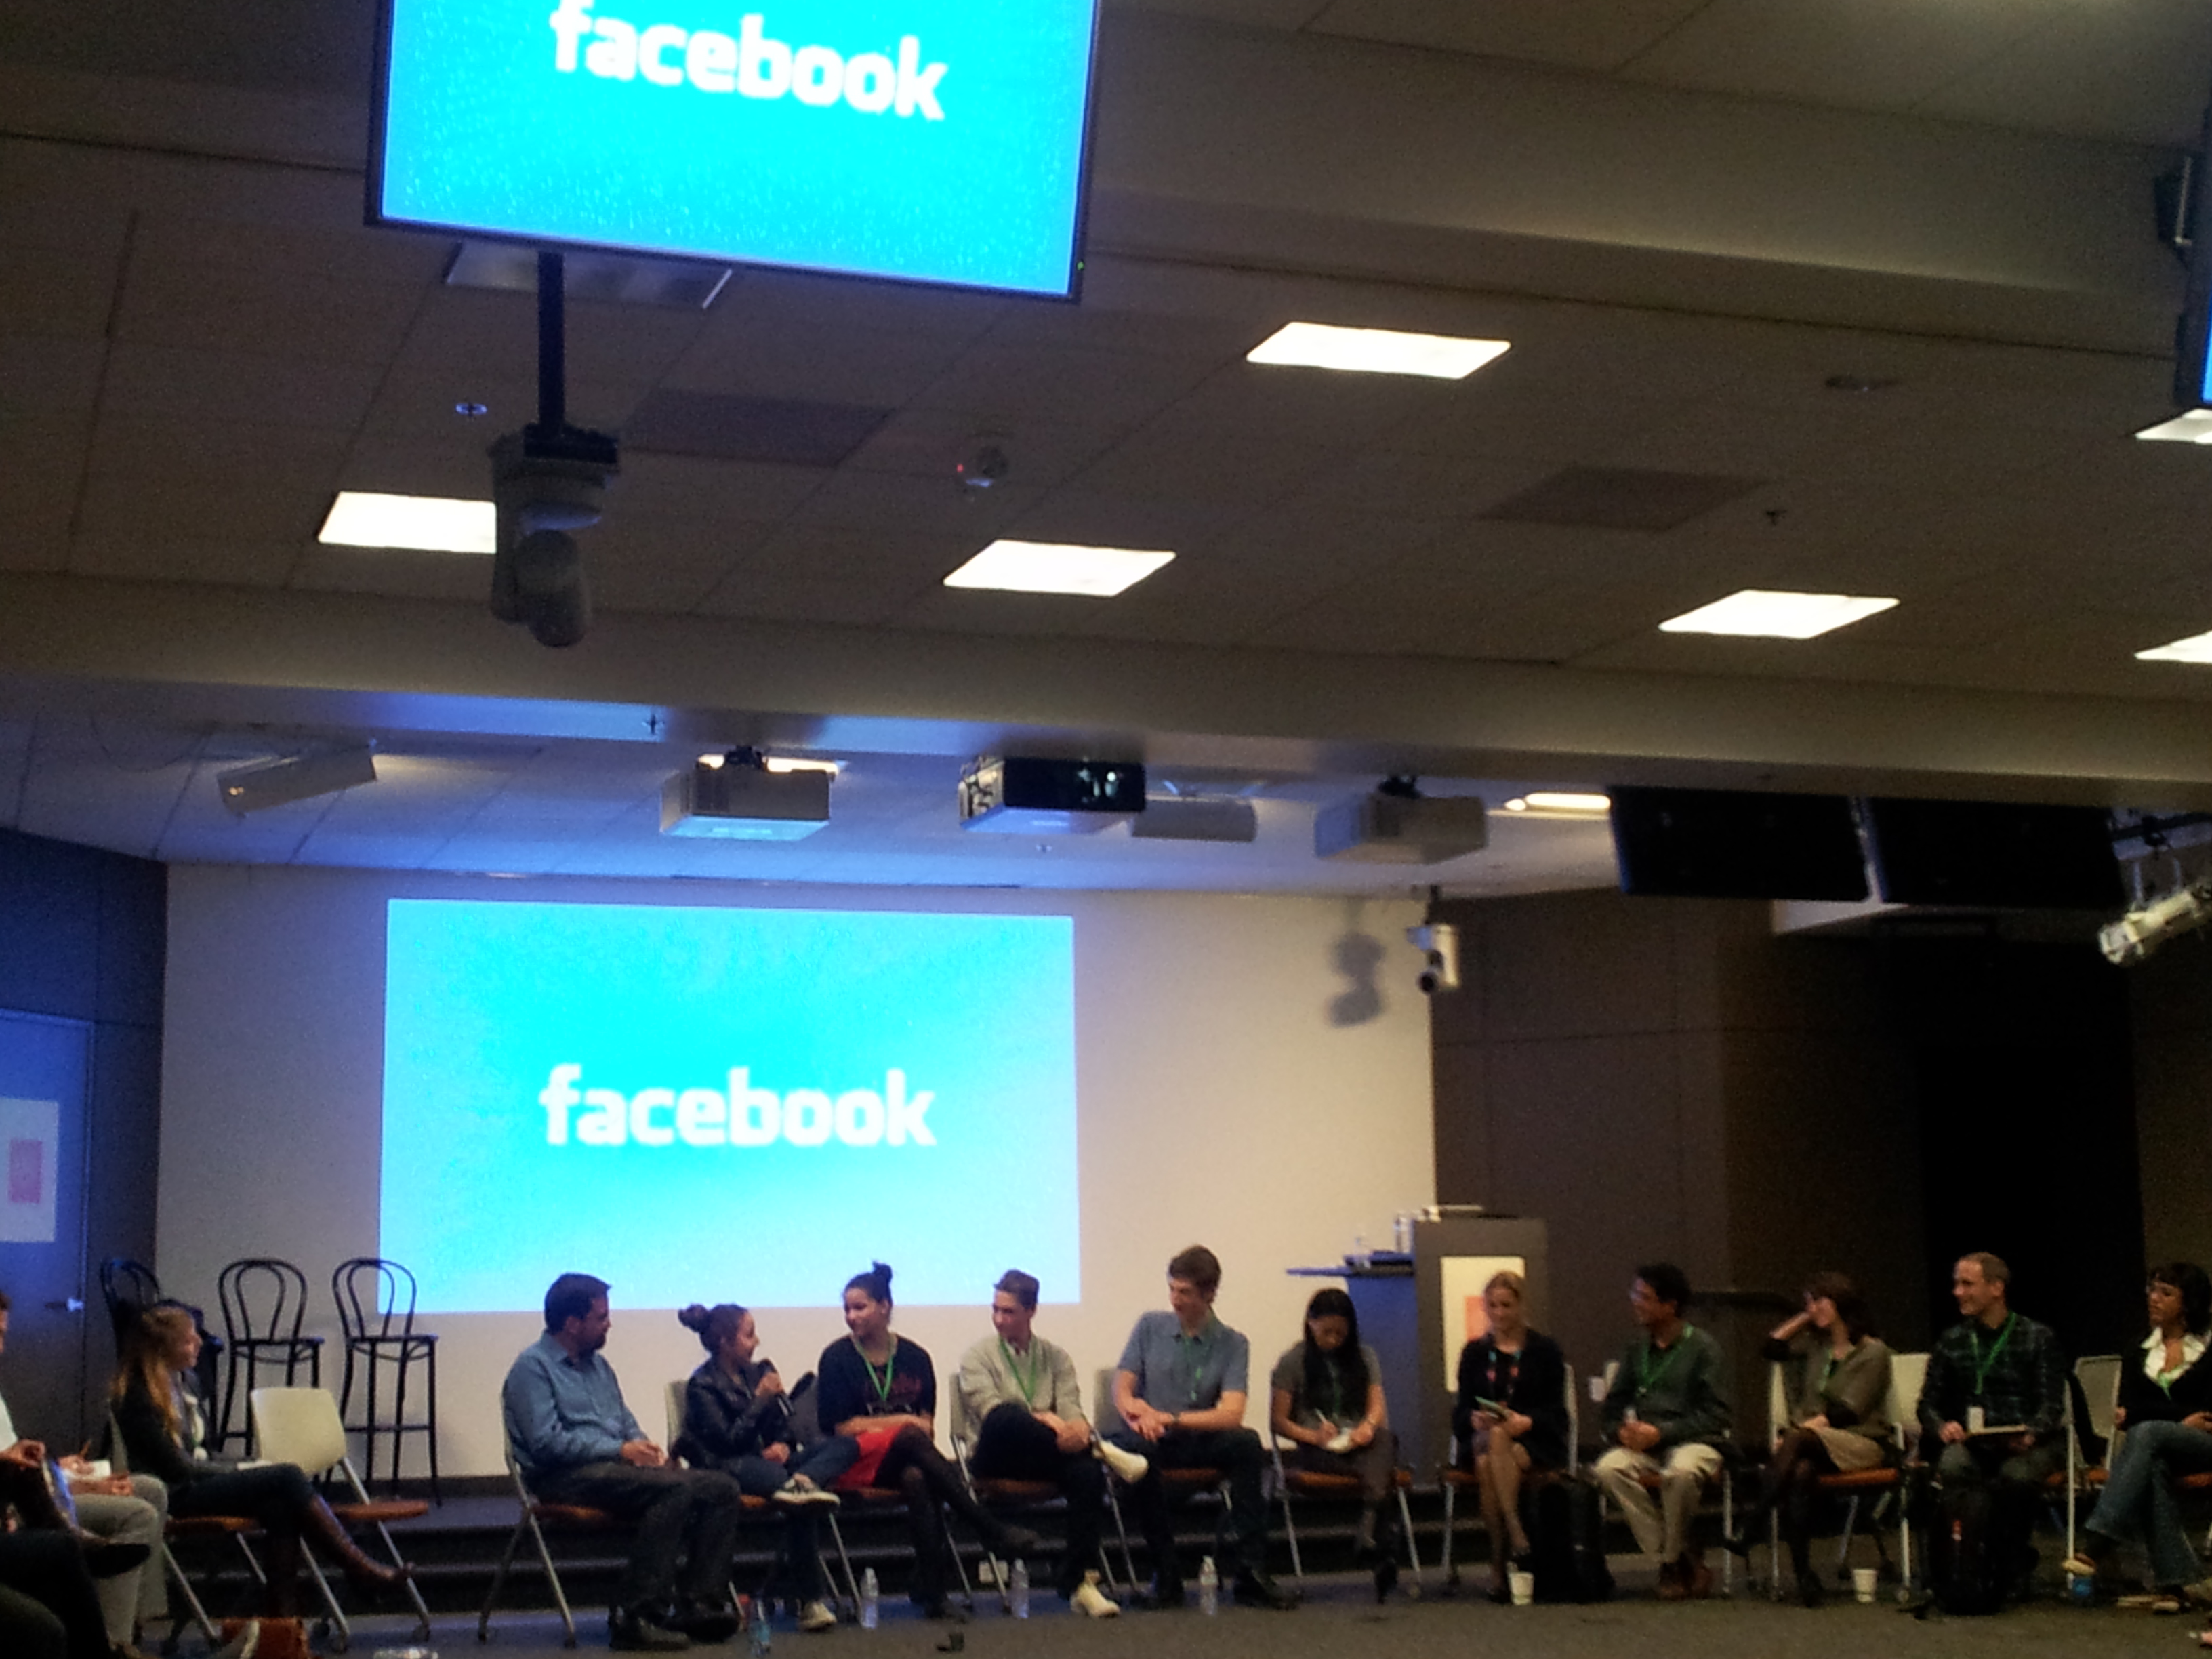 facebook compassion research day, LGBTQ youth panel not in our school, cyberbullying